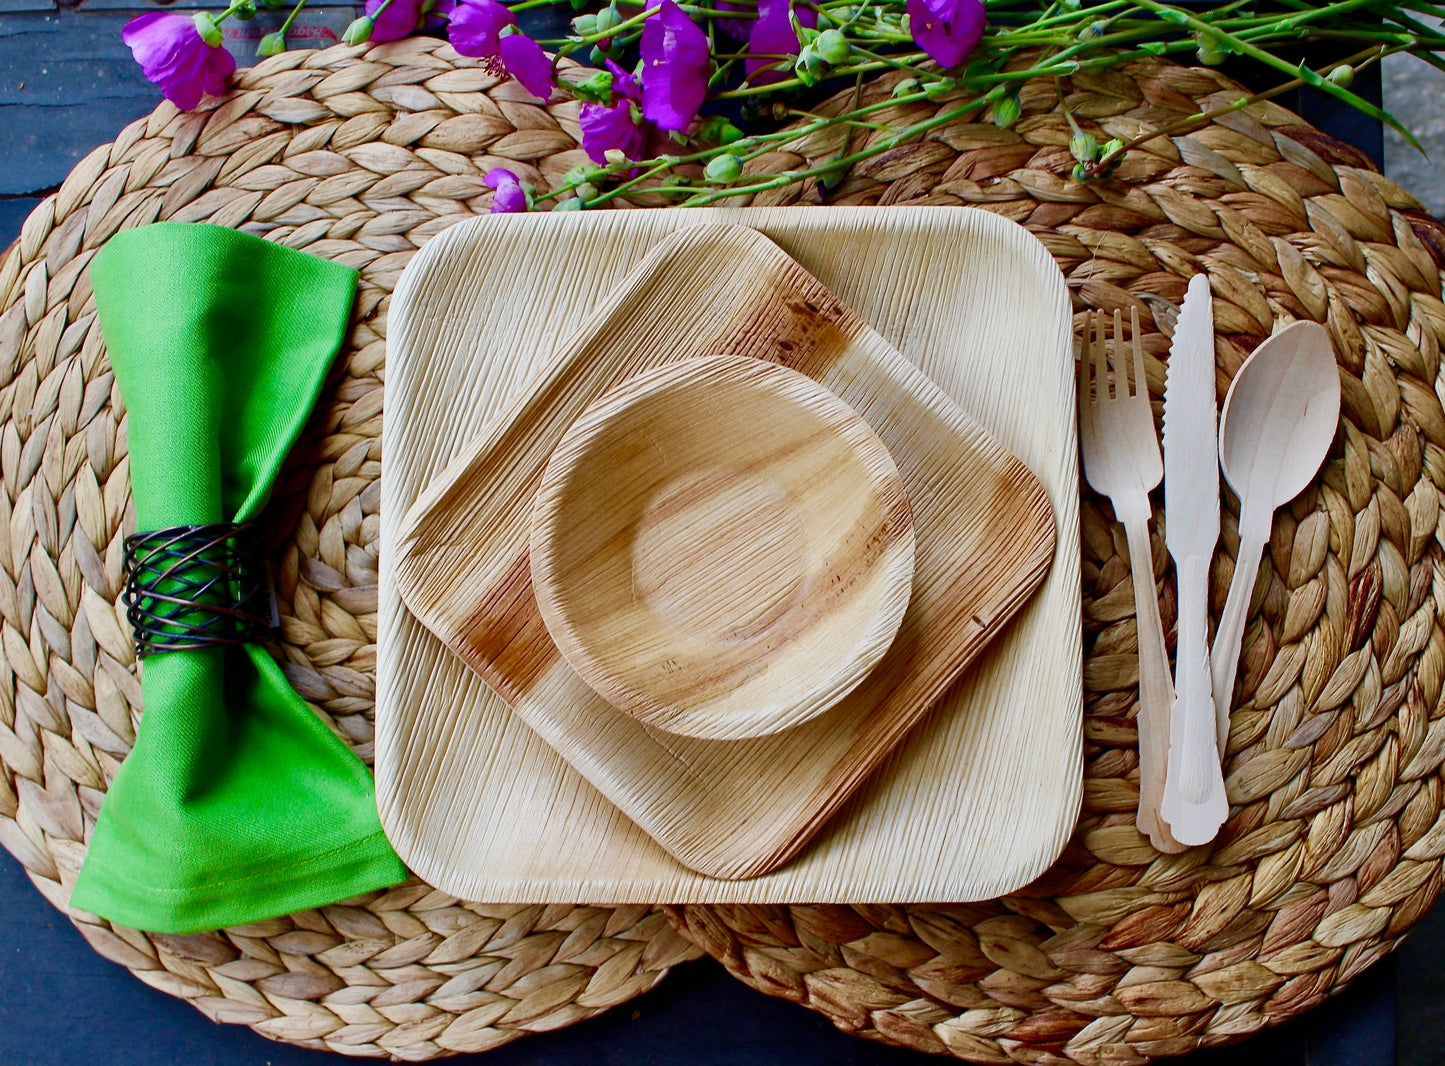 Palm Leaf plates 25 Pice 9.5" Square 25 Pice 7" Square - 25 pice 5" Bowl  and 75 Pic cutlery